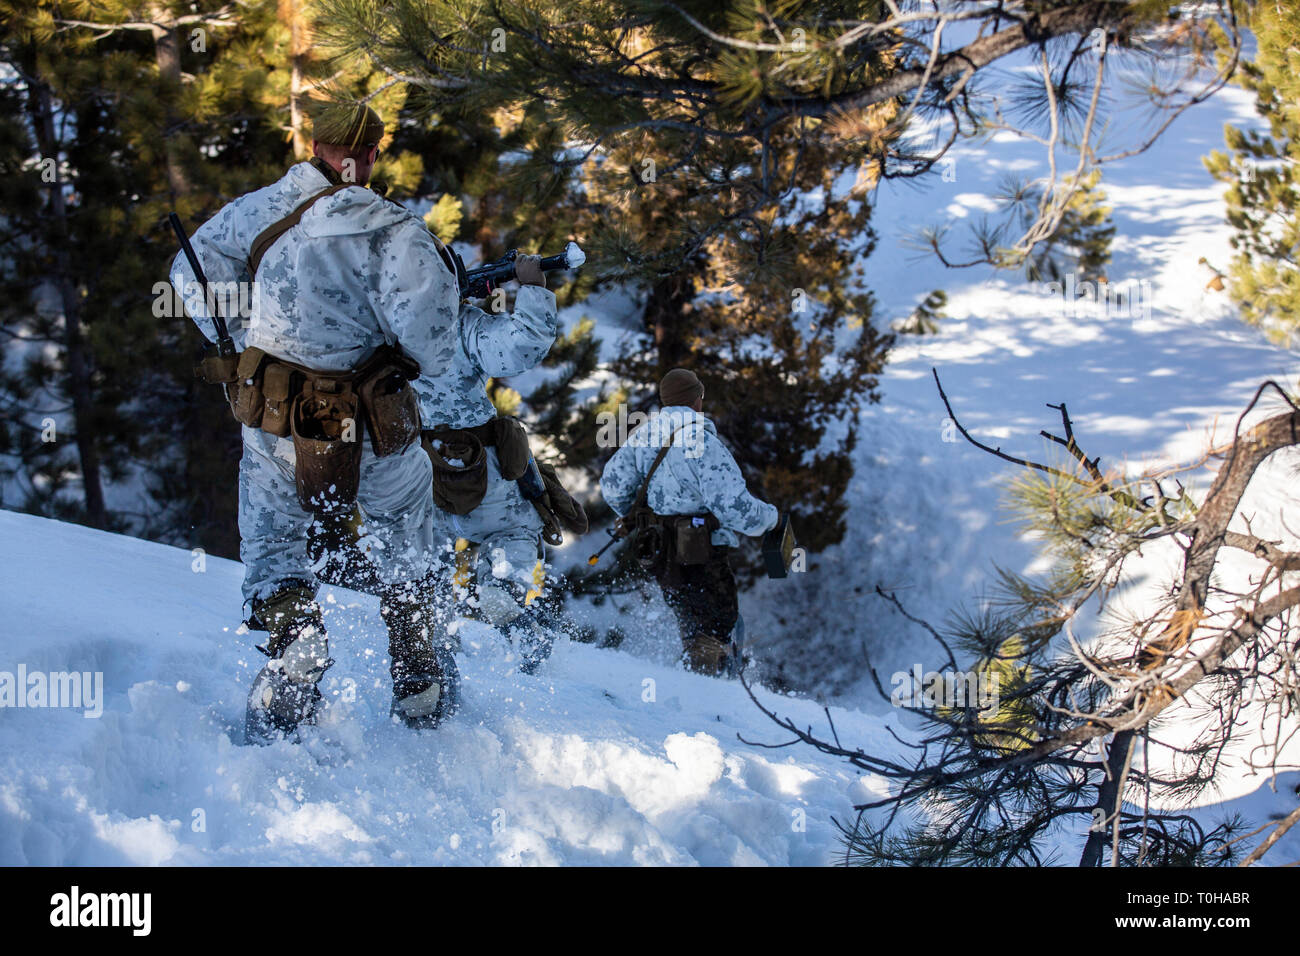 U.S. Marines with Company E, 2nd Battalion, 6th Marine Regiment, 2nd Marine Division conduct a simulated assault during Mountain Training Exercise (MTX) 2-19 at Marine Corps Mountain Warfare Training Center, Bridgeport, Calif., March 18, 2019. Marines with Company E work on maneuvering techniques in snowy mountainous terrain. (U.S. Marine Corps photo by Lance Cpl. Tyler M. Solak) Stock Photo